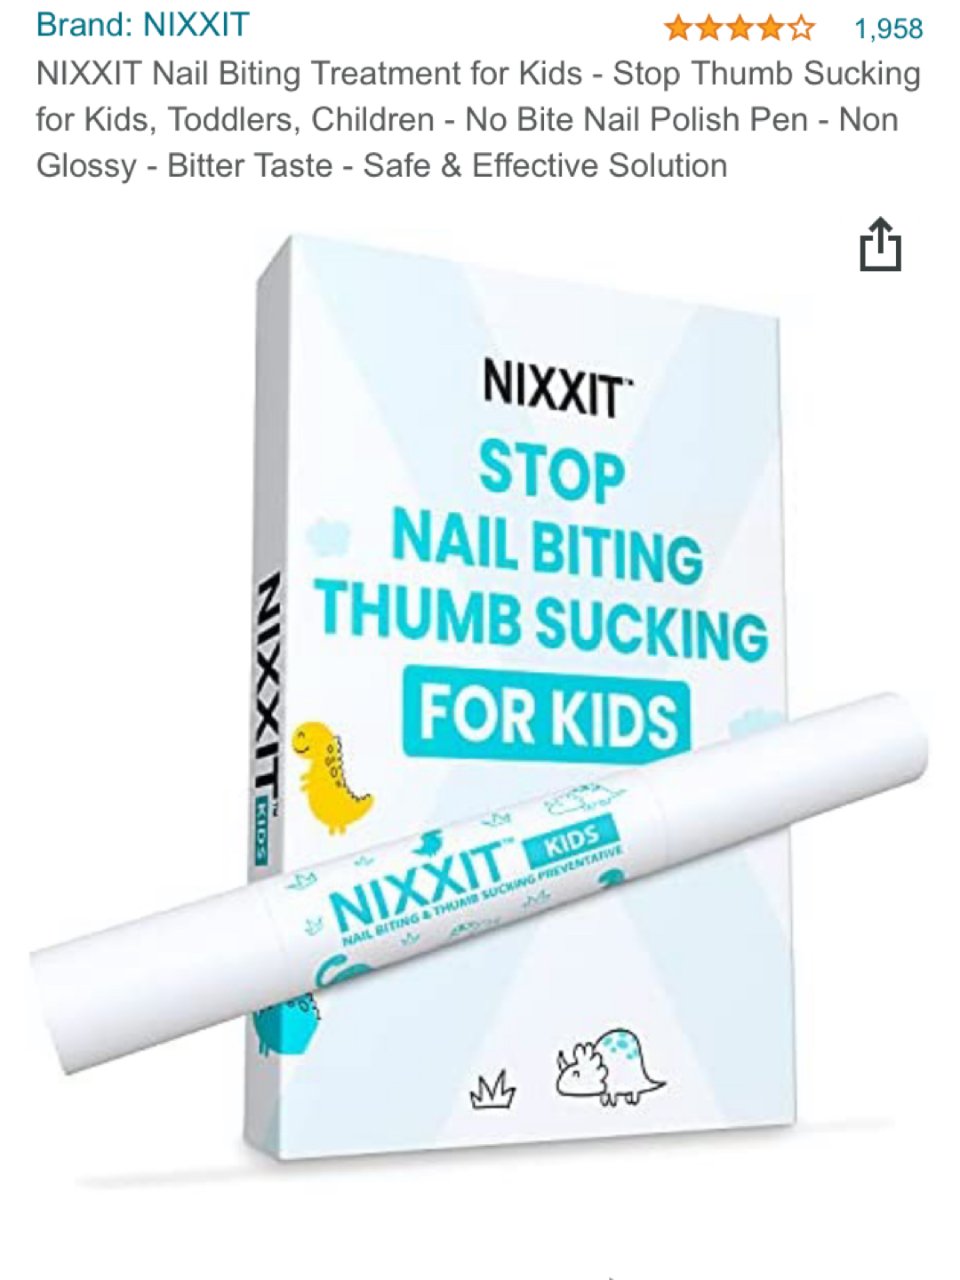 Amazon 亚马逊,NIXXIT Nail Biting Treatment for Kids - Stop Thumb Sucking for Kids, Toddlers, Children - No Bite Nail Polish Pen - Non Glossy - Bitter Taste - Safe & Effective Solution : Baby